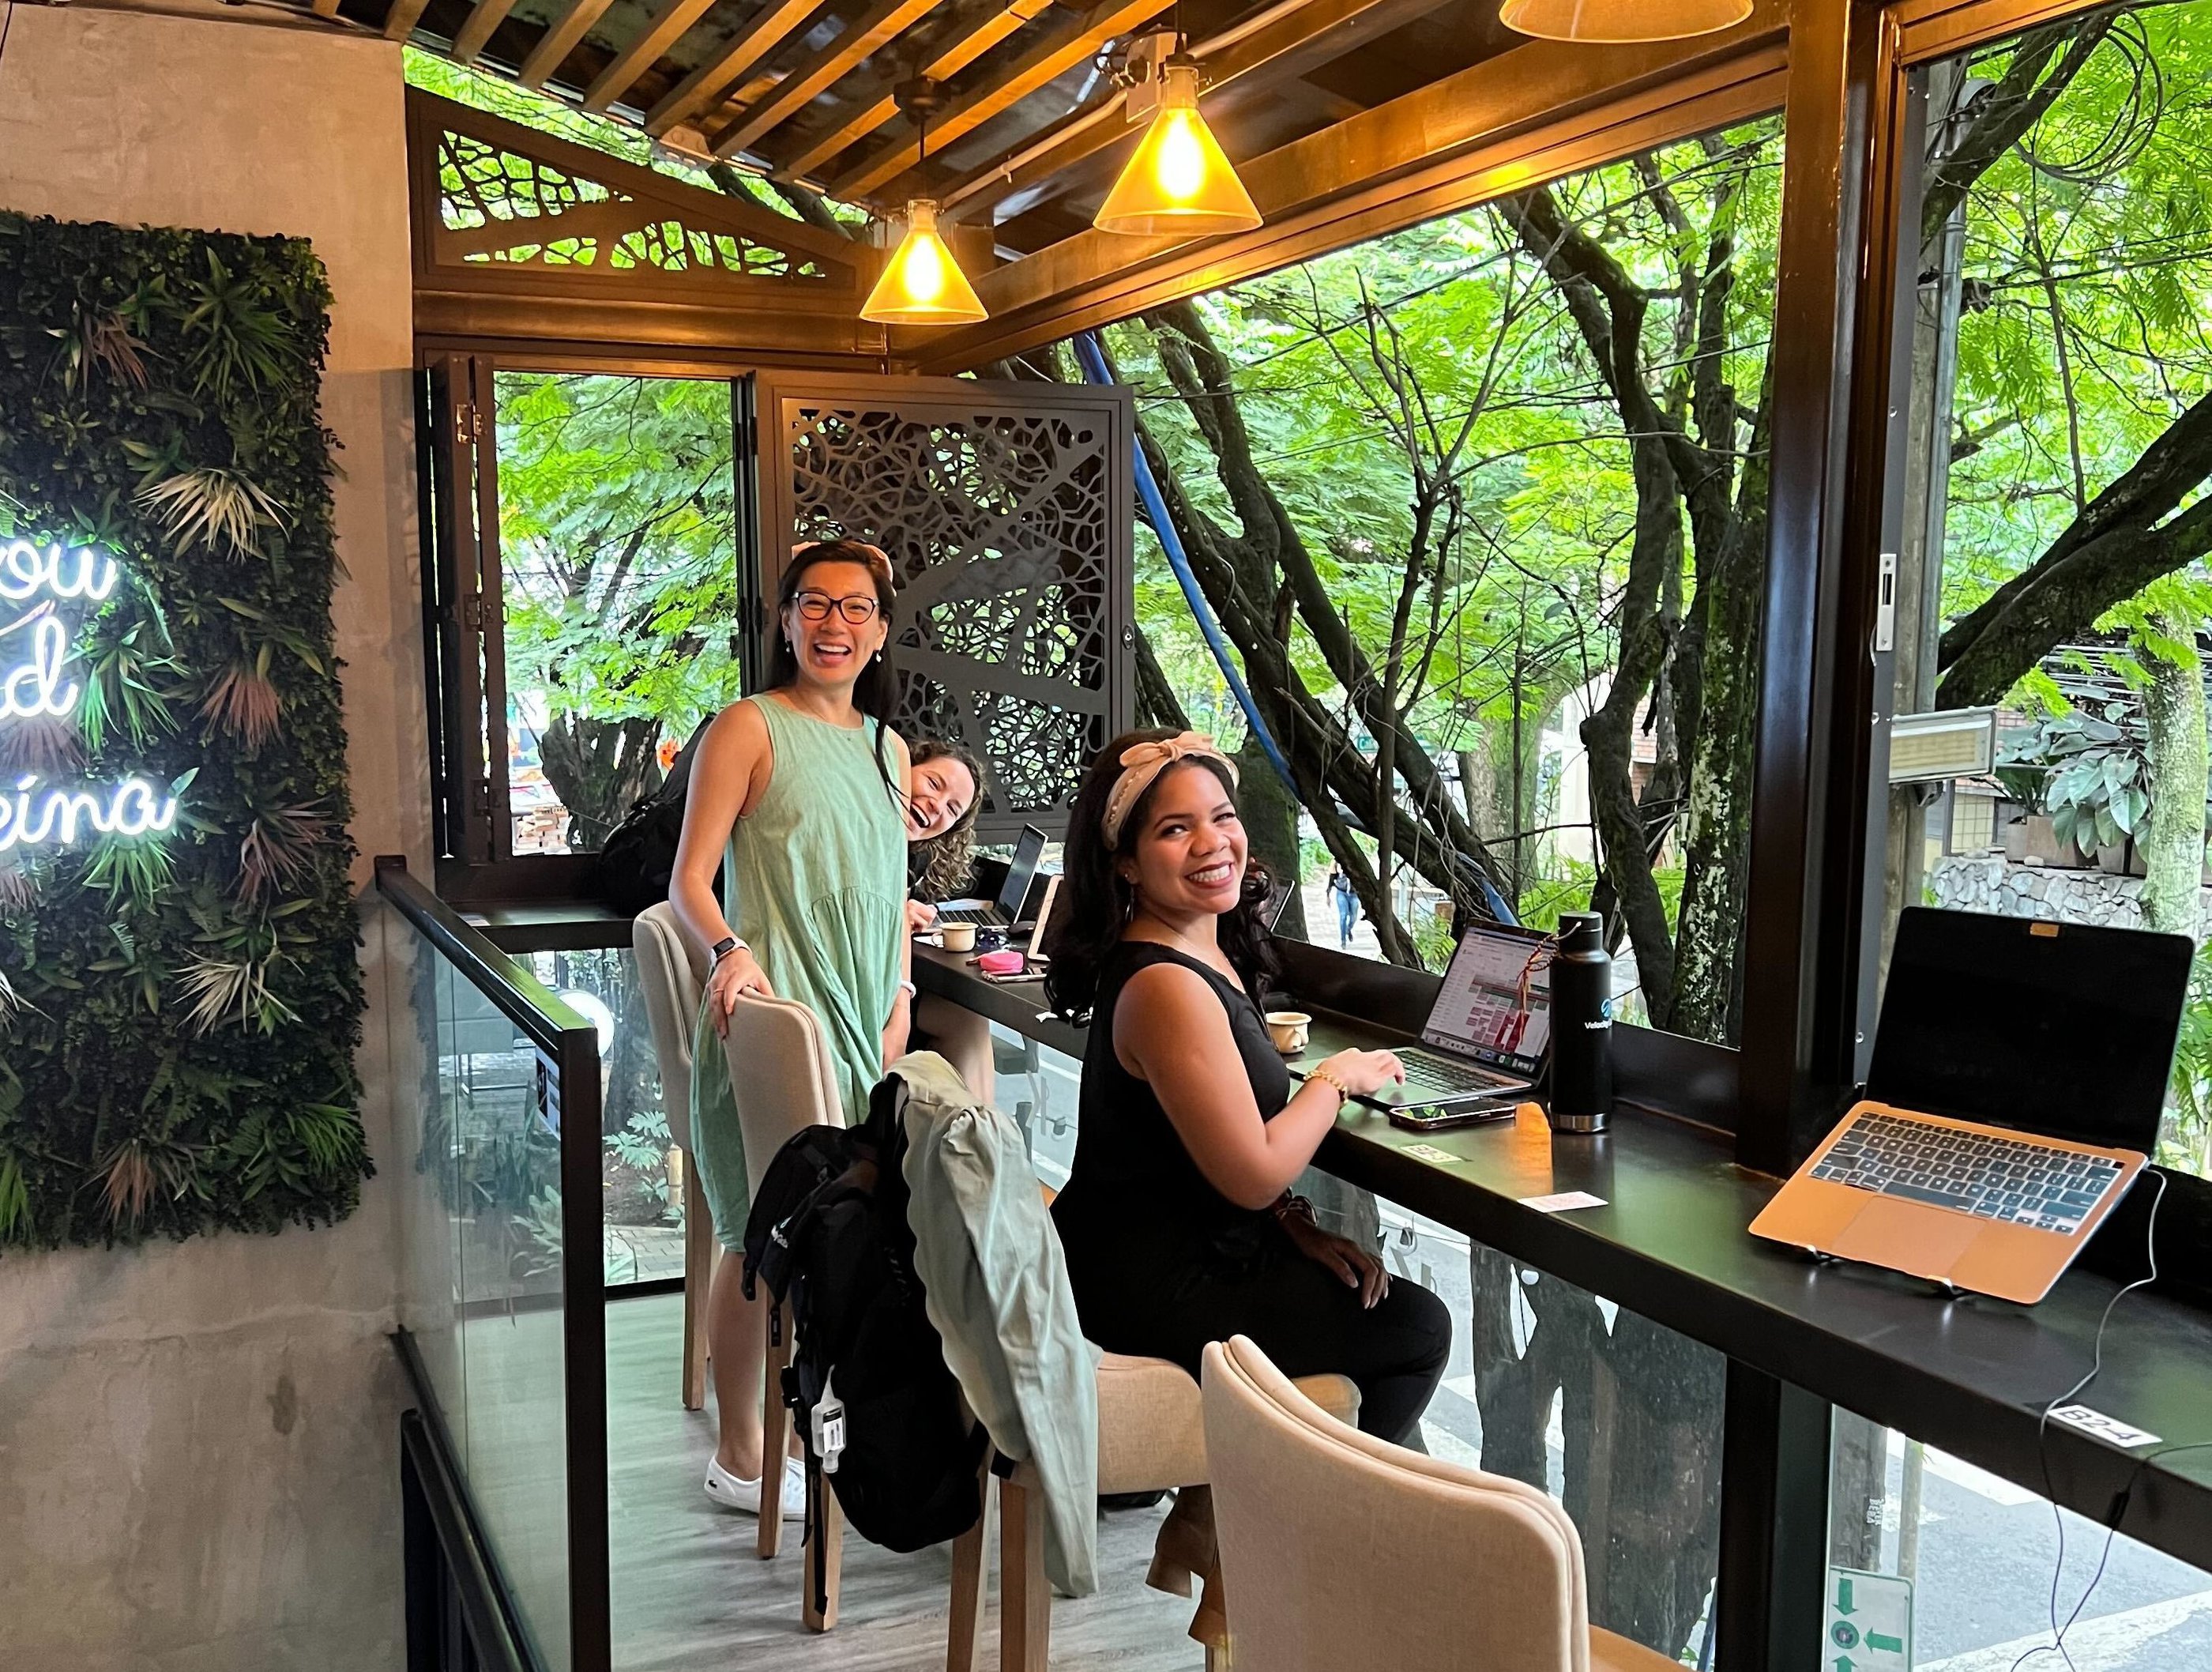 Two woman at a co-working office, hanging out by a bar like table, overlooking green vegetation